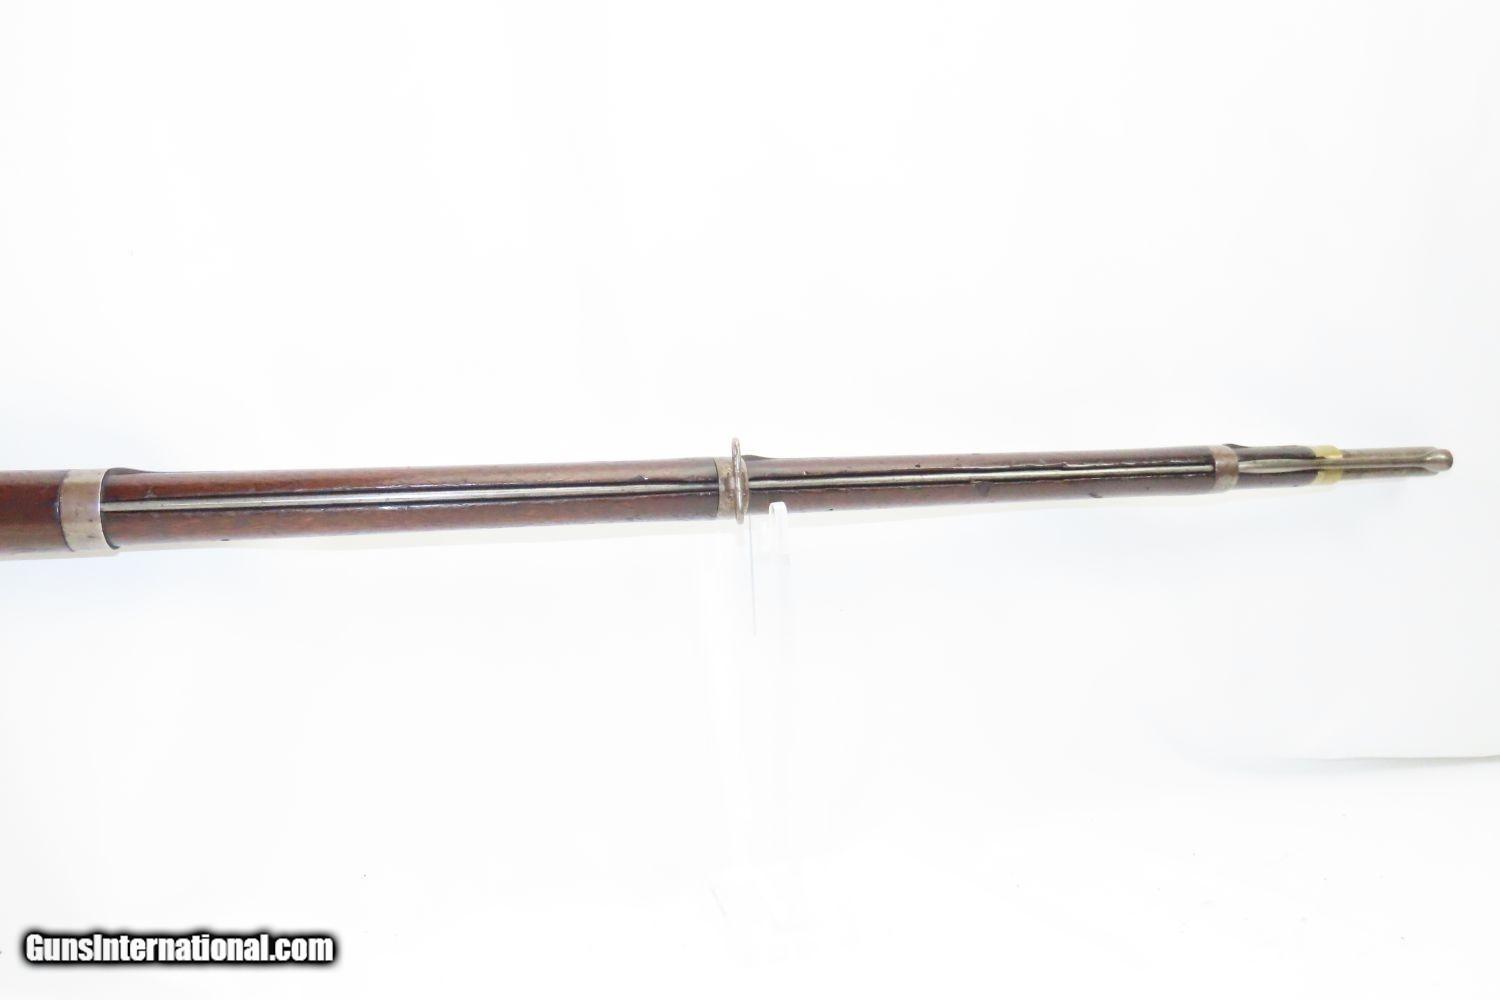 RARE Antique GENERAL ROBERTS Breech-Loading Springfield Model 1855 Rifle 58  PROVIDENCE TOOL Co. Conversion with BAYONET! for sale